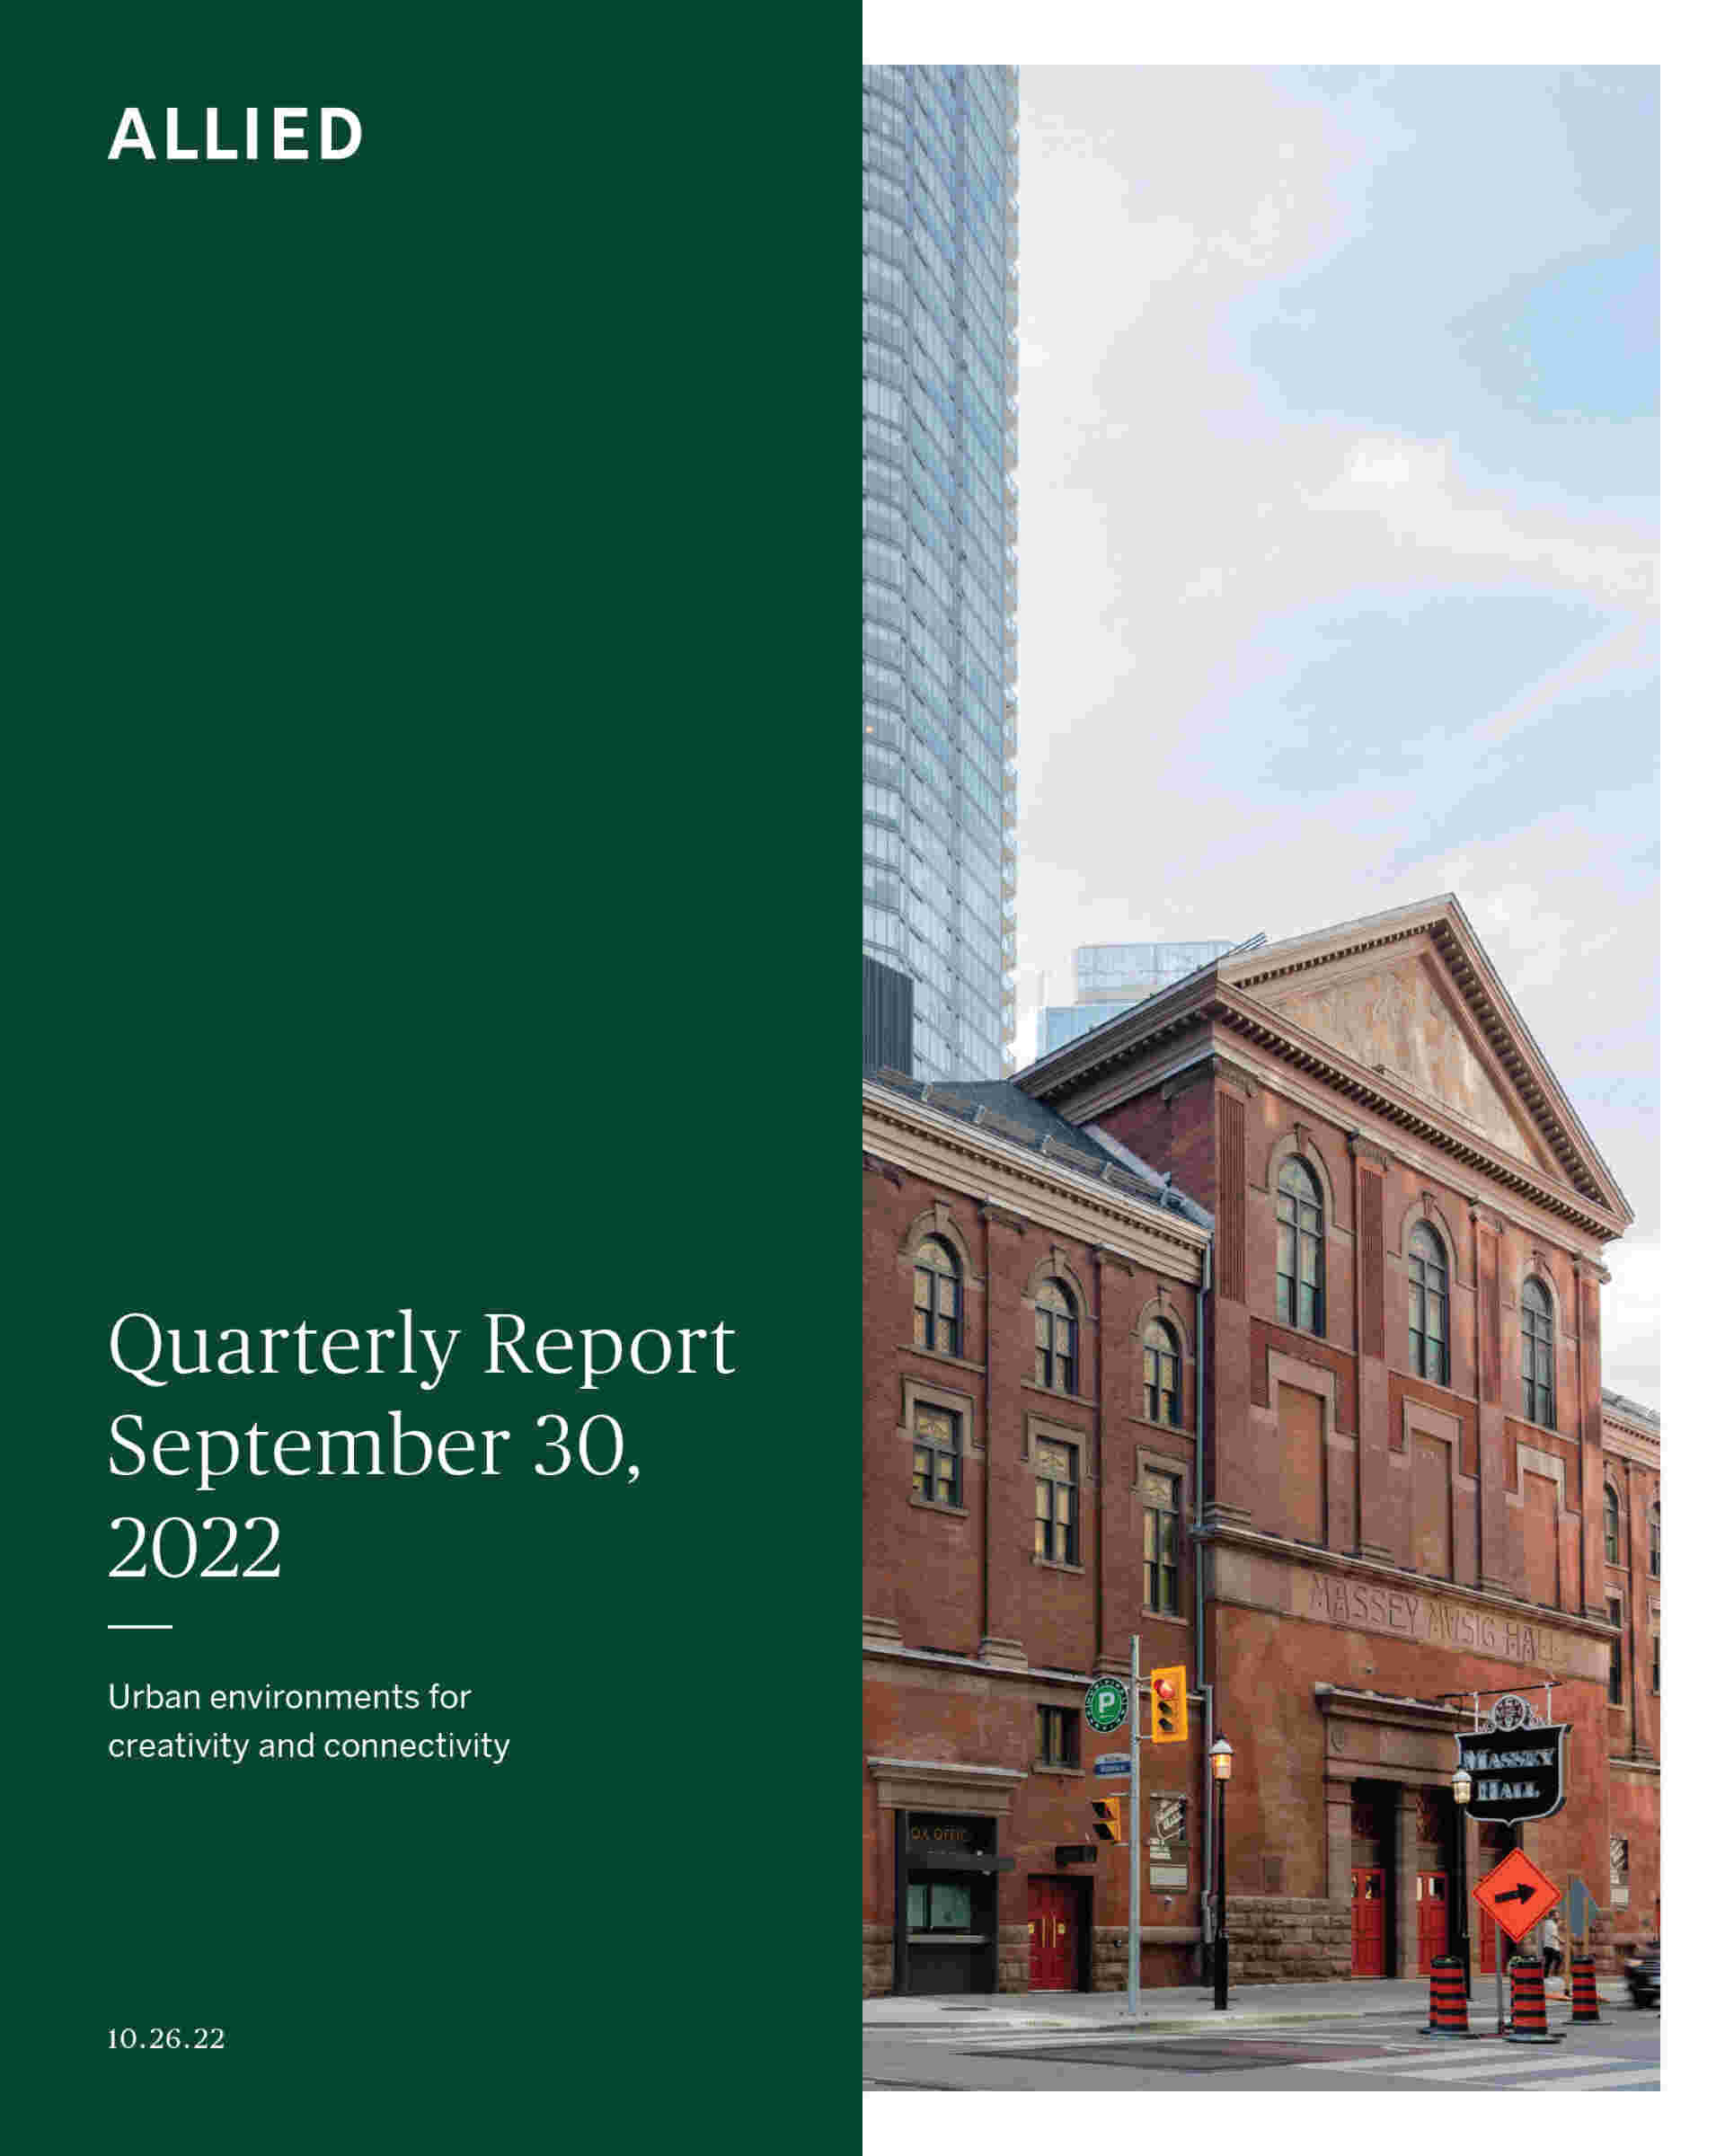 Financial Reports 2022 - Allied_Q3Report_October-26-2022-1